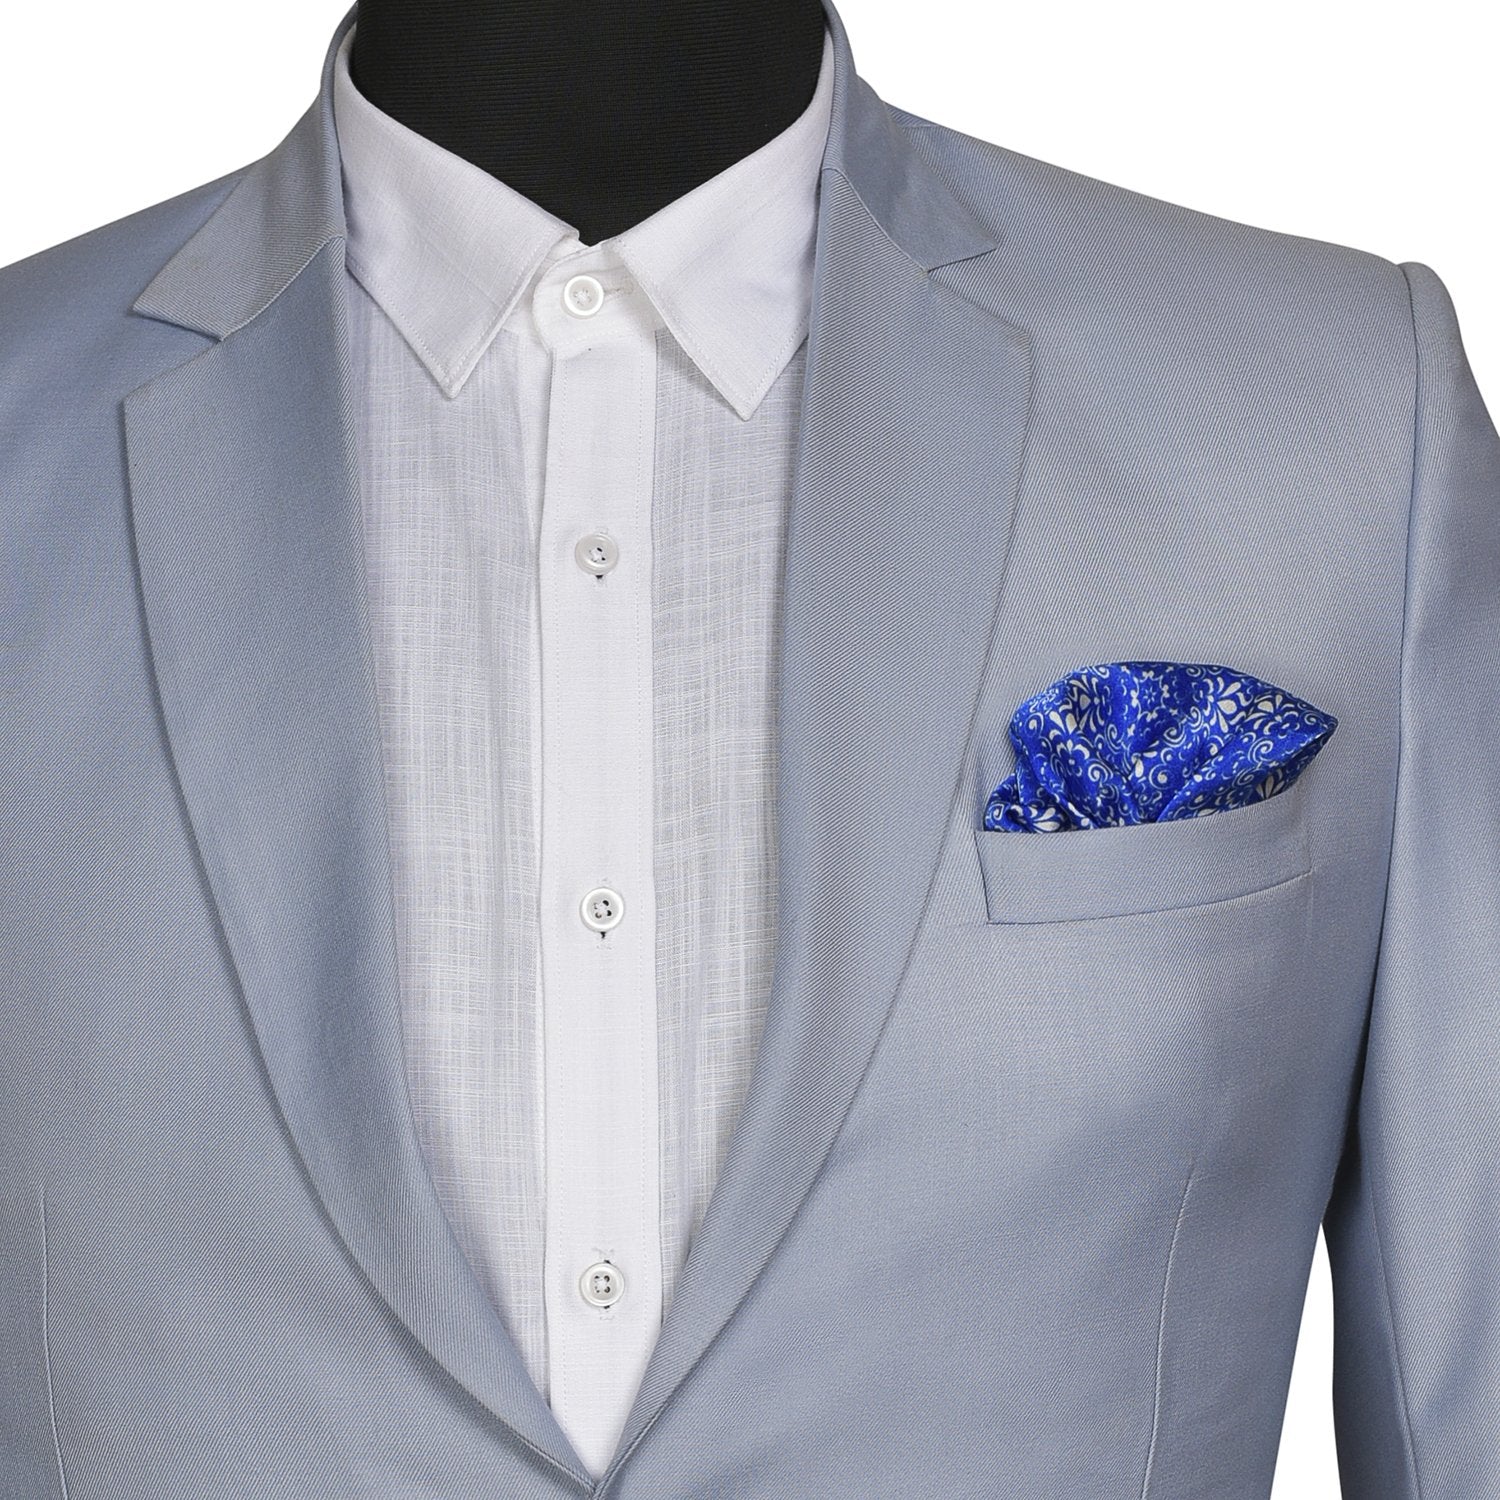 Chokore Cobalt Blue and White Silk Pocket Square -Indian At Heart line